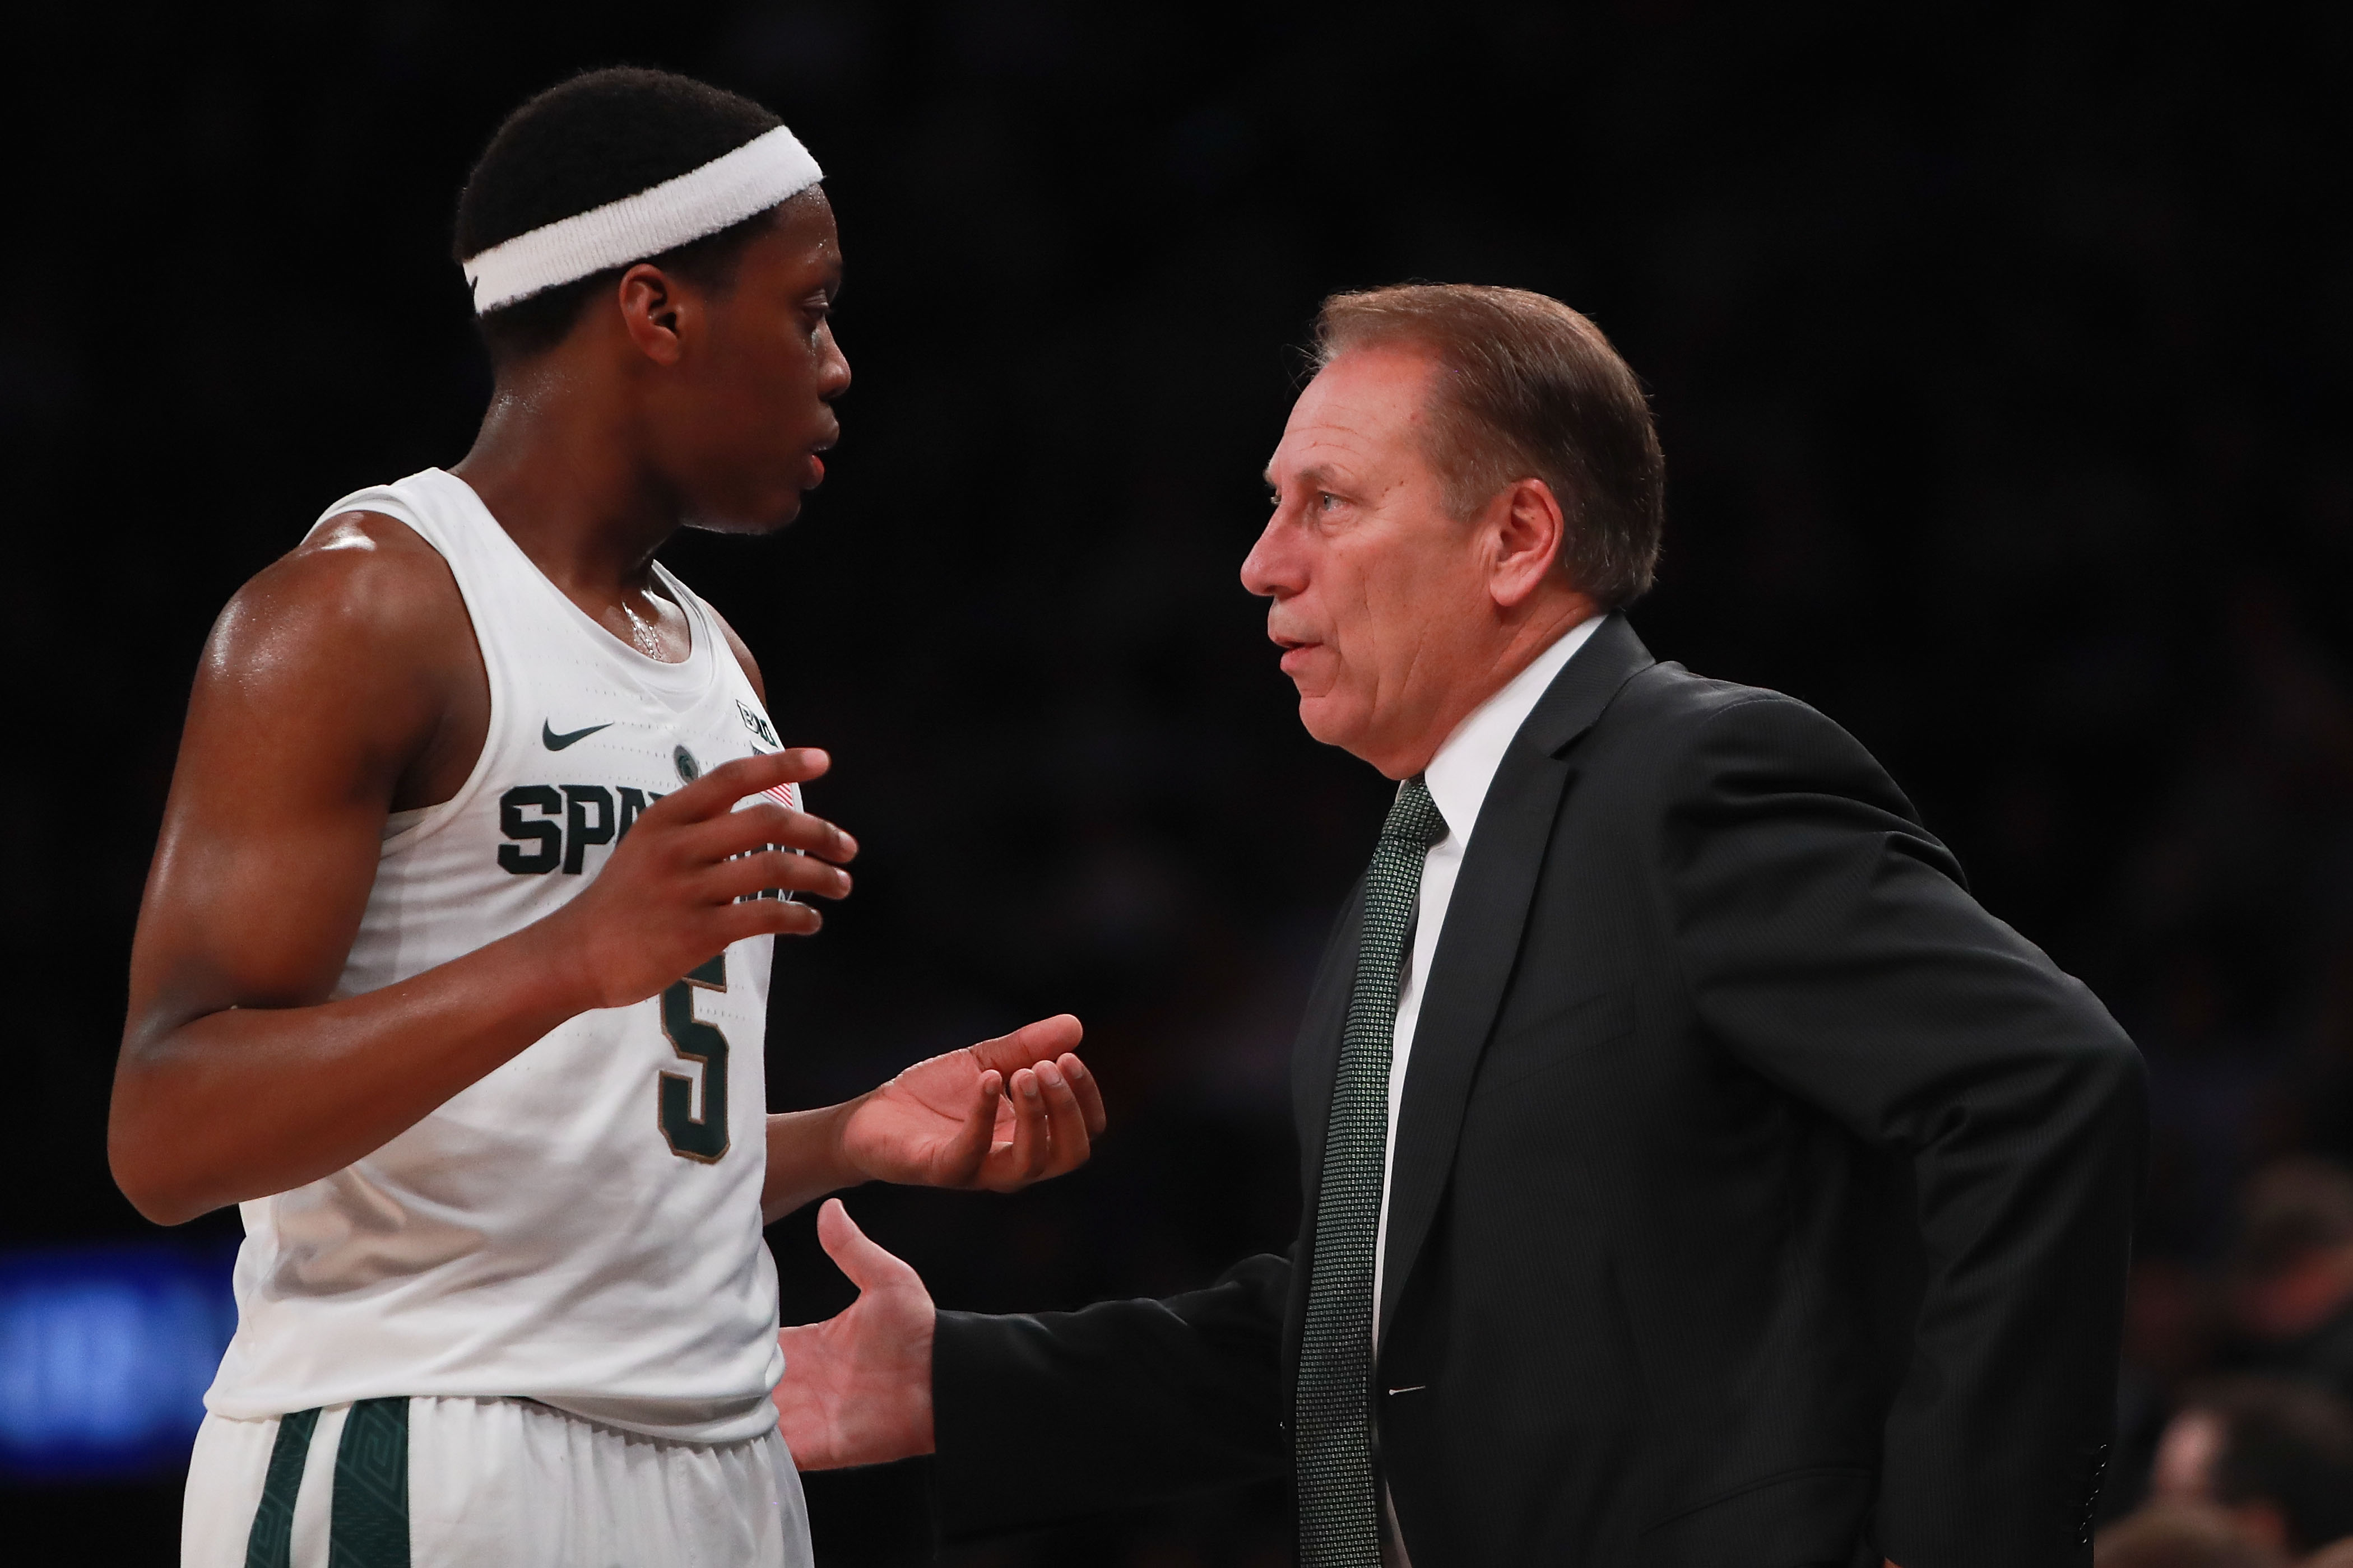 NEW YORK, NY - NOVEMBER 15: Head coach Tom Izzo of the Michigan State Spartans talks with Cassius Winston #5 in the second half during the State Farm Champions Classic at Madison Square Garden on November 15, 2016 in New York City. (Photo by Michael Reaves/Getty Images)